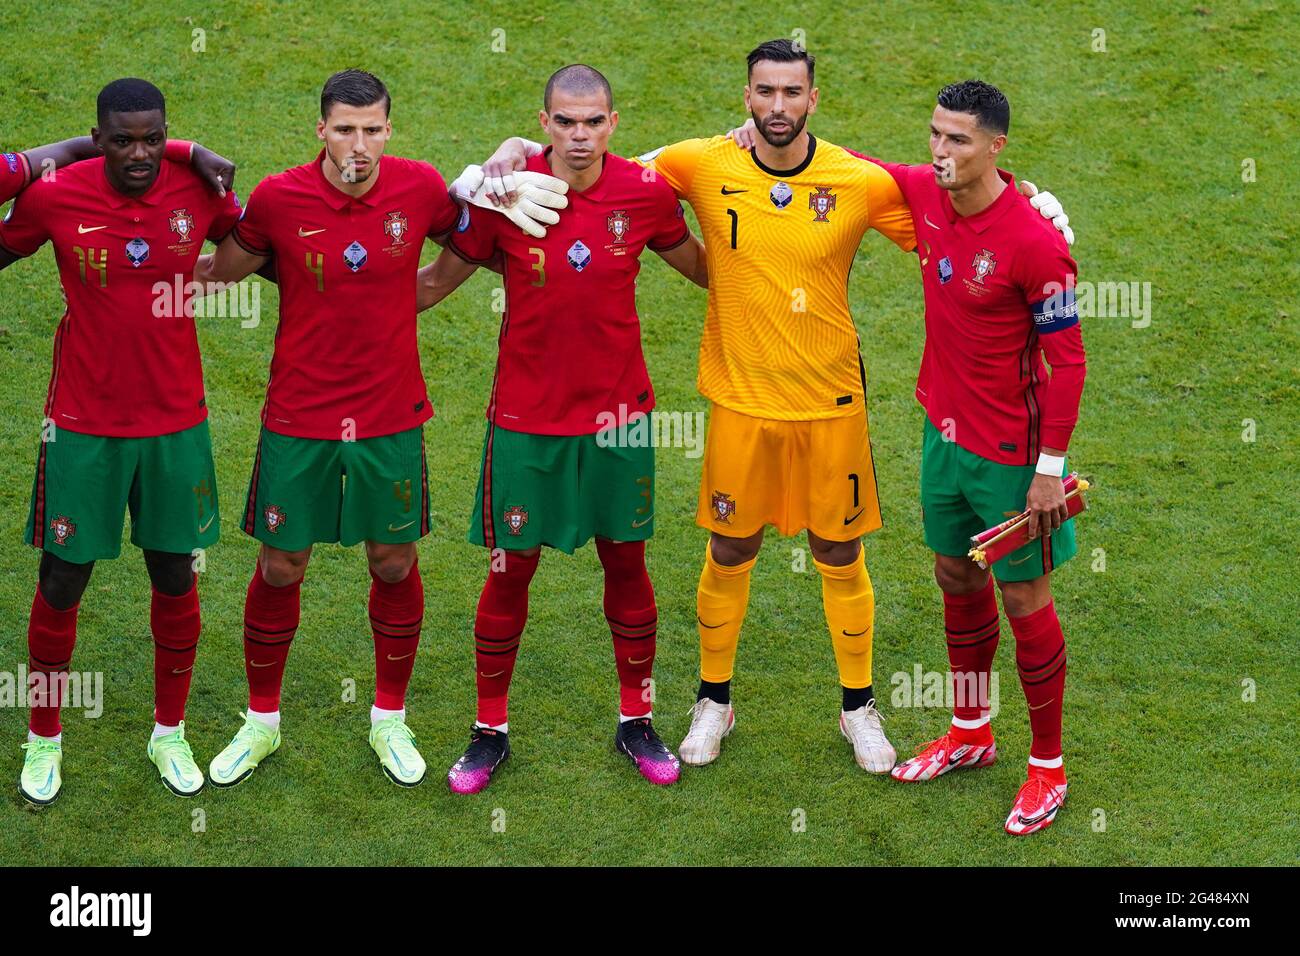 MUNCHEN, GERMANY - JUNE 19: William Carvalho of Portugal, Ruben Dias of Portugal, Pepe of Portugal, Rui Patricio of Portugal and Cristiano Ronaldo of Portugal during the UEFA Euro 2020 Group F match between Portugal and Germany at Allianz Arena on June 19, 2021 in Munchen, Germany (Photo by Andre Weening/Orange Pictures) Stock Photo